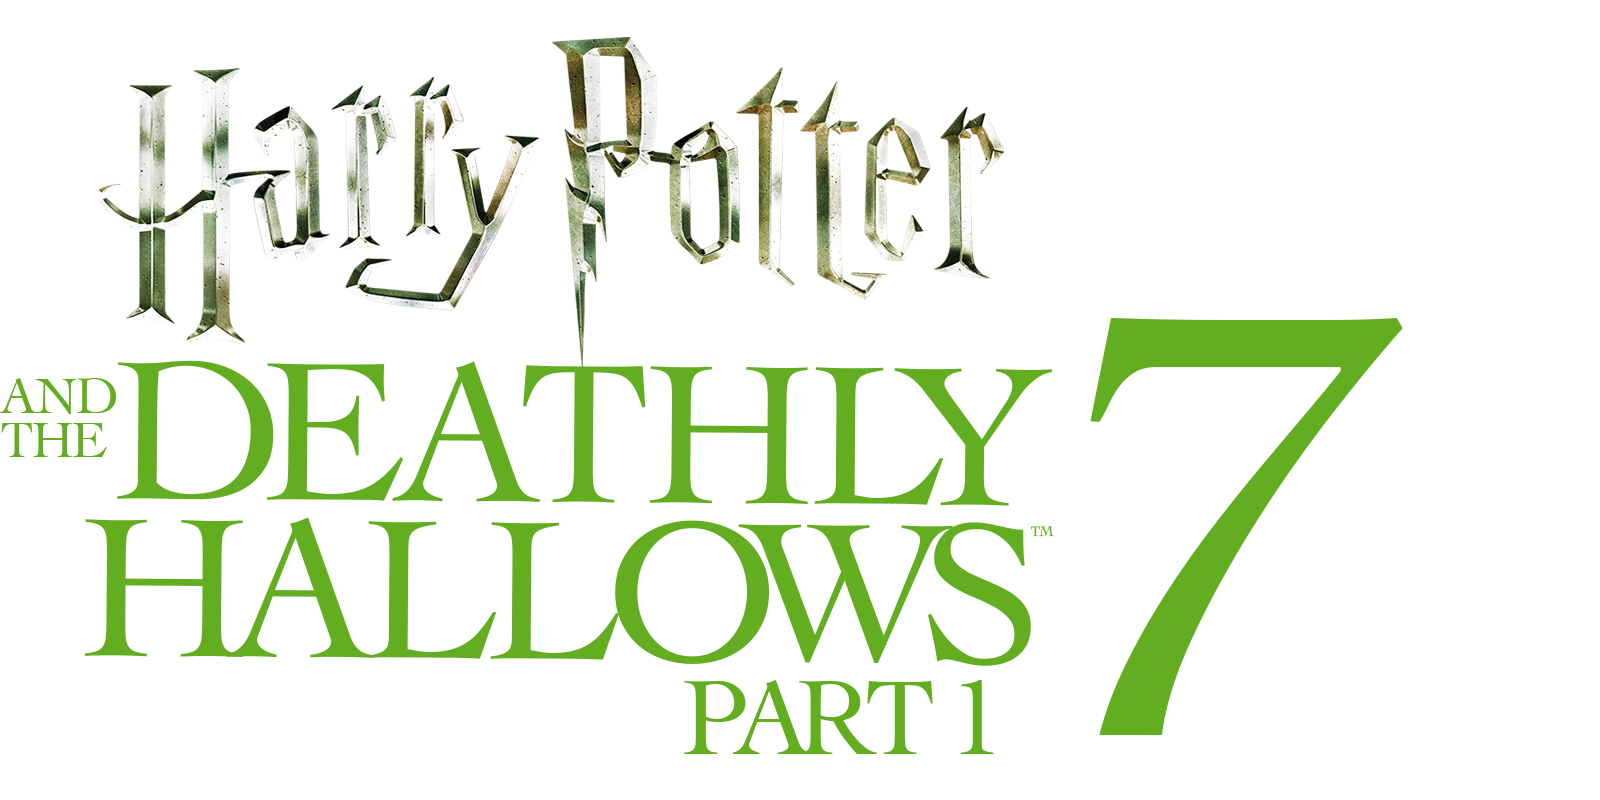 harry potter and the deathly hallows part 1 full movie